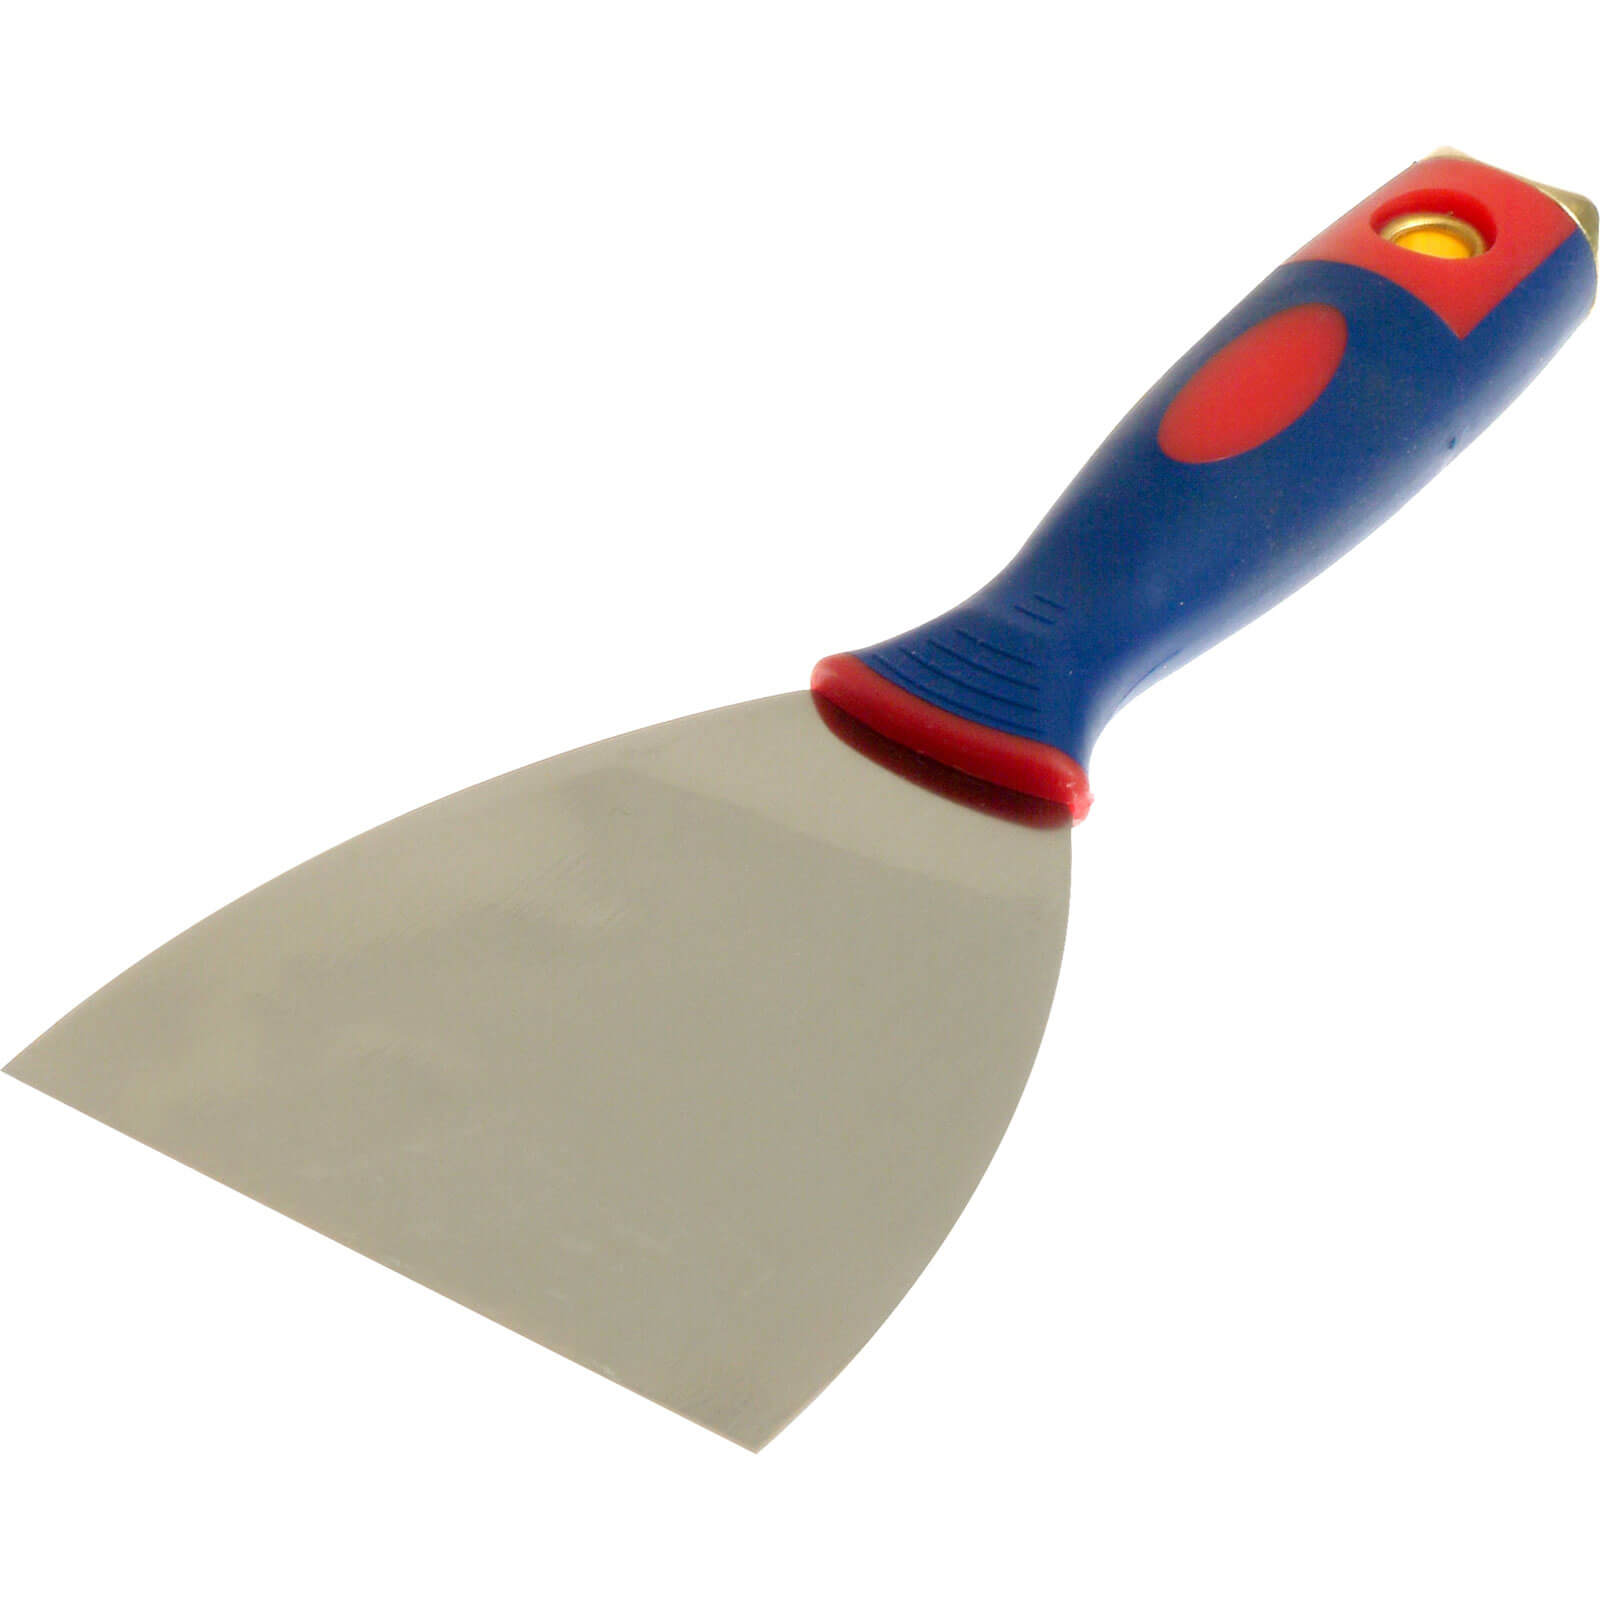 Photos - Putty Knife / Painting Tool RST Stiff Putty Knife 75mm RST5518F 